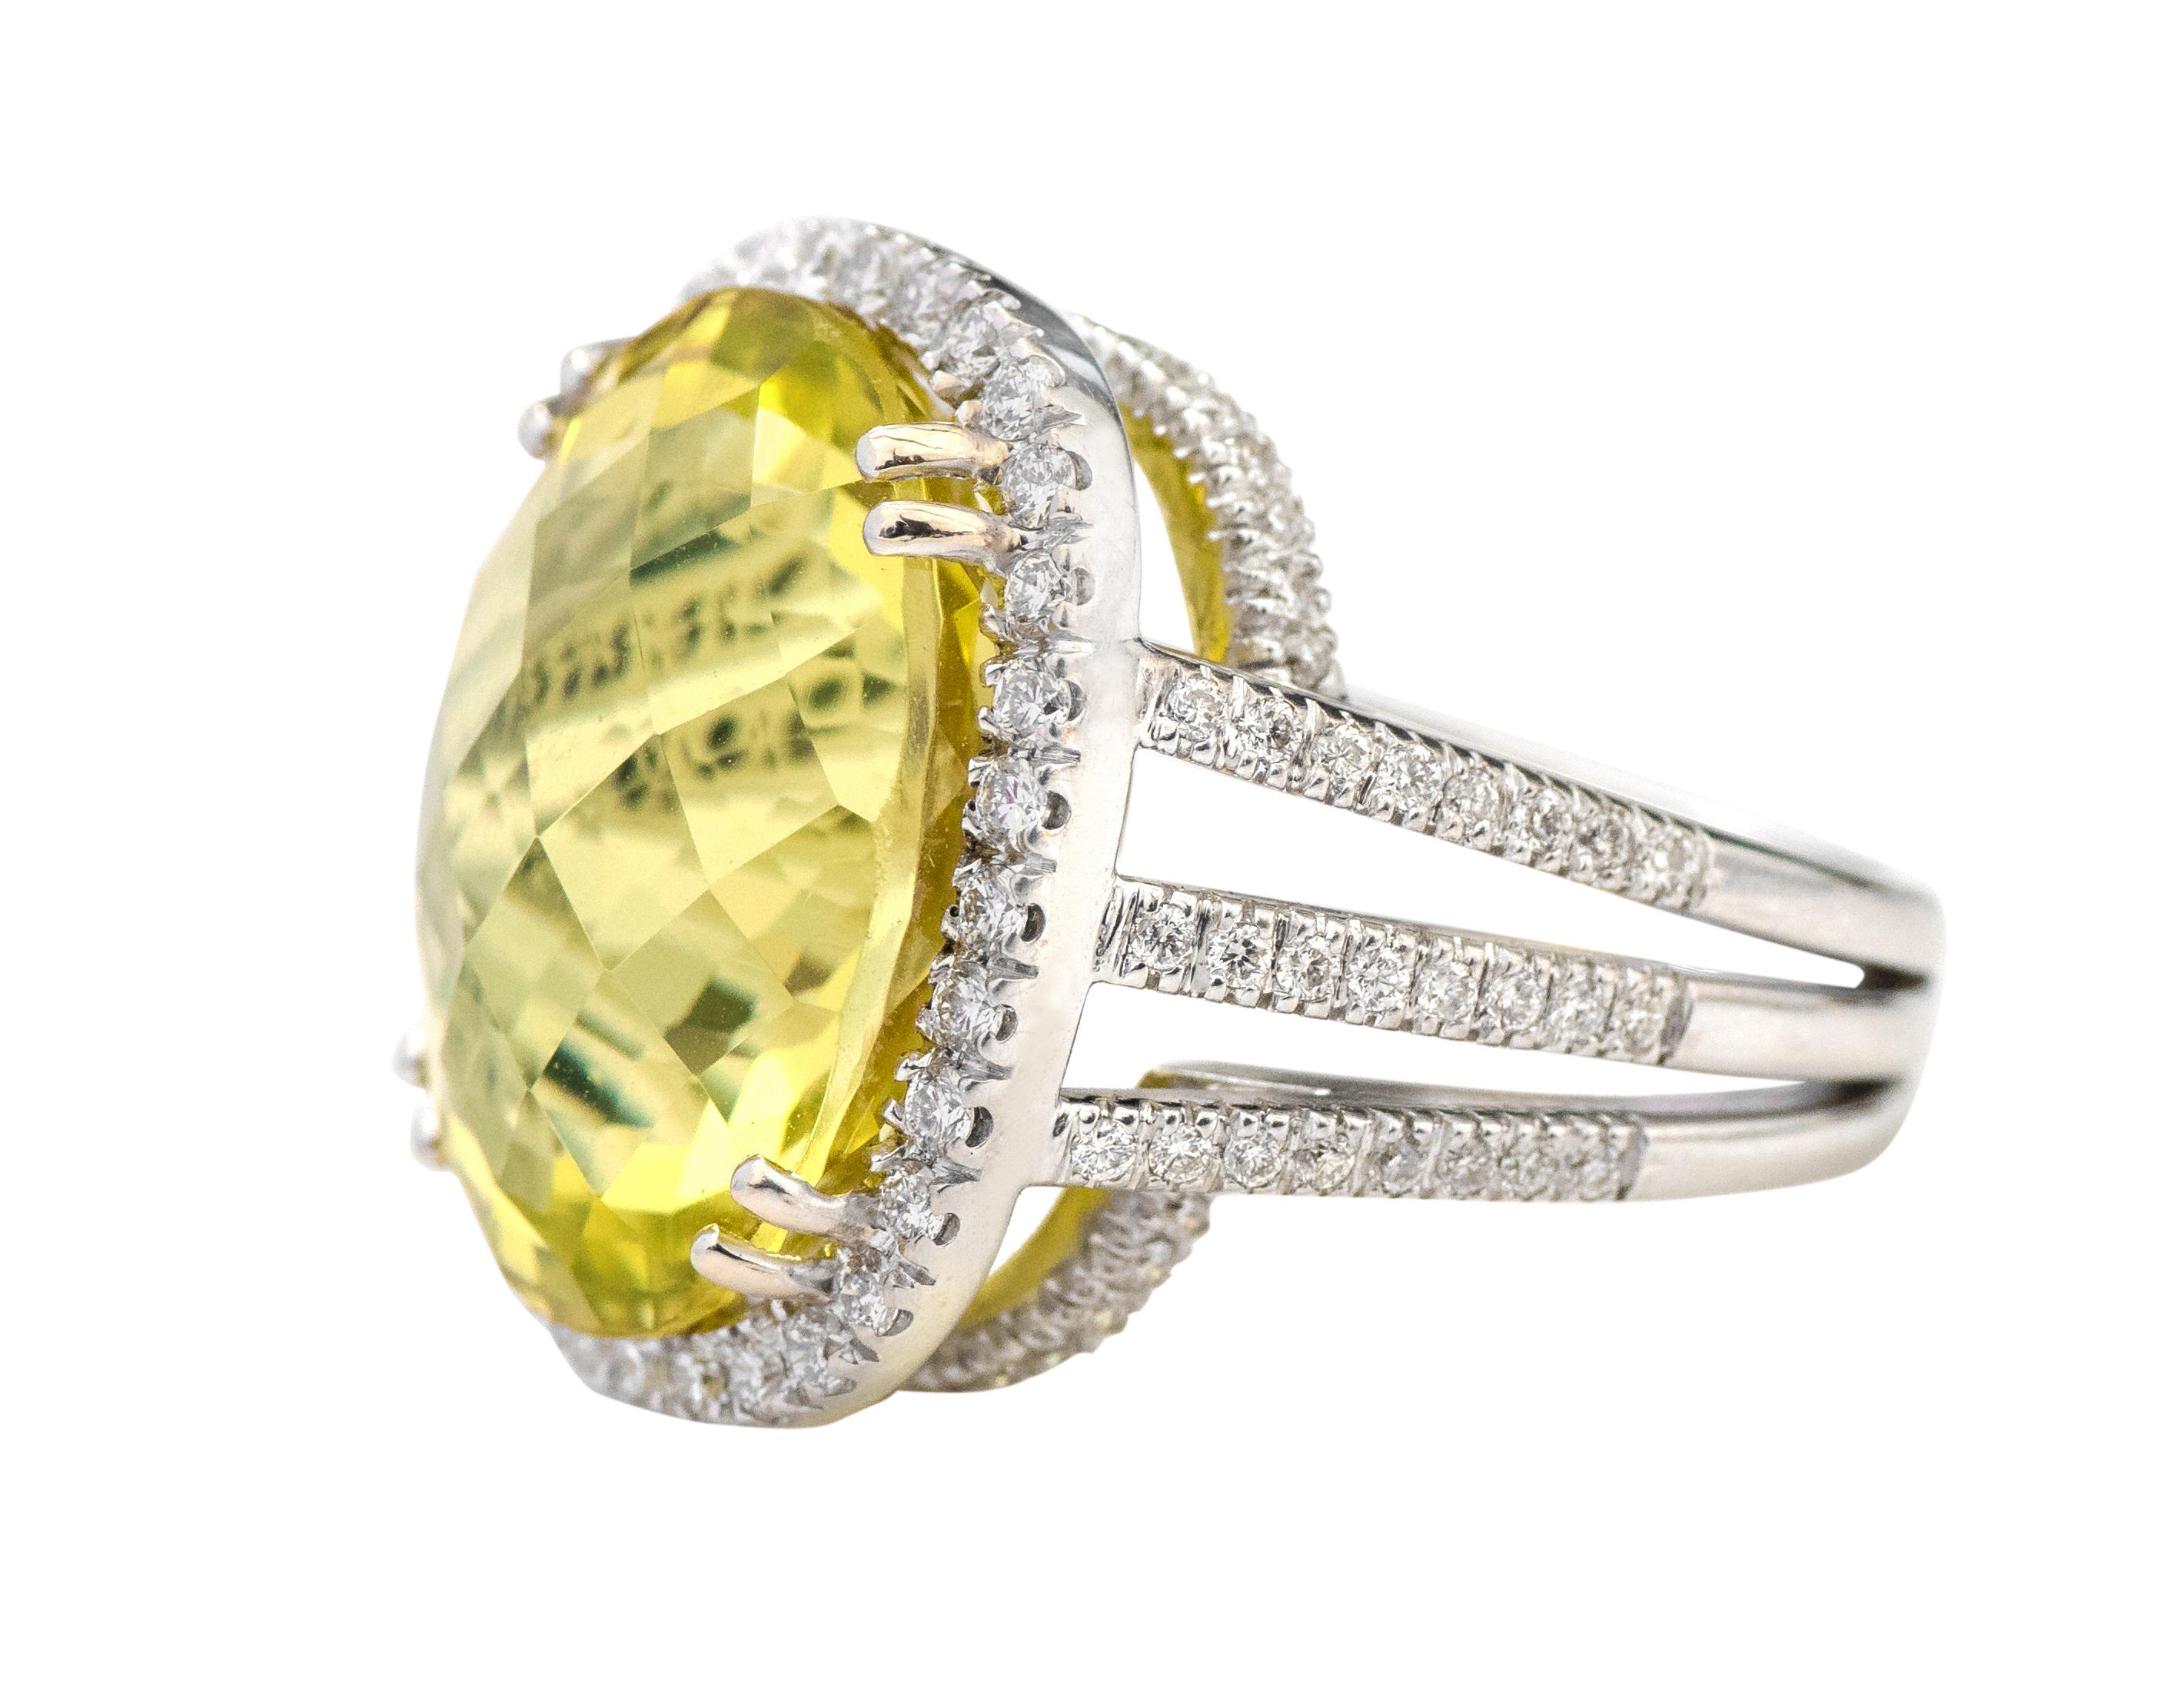 18 Karat White Gold 19.20 Carat Oval-Cut Lemon Topaz and Diamond Cocktail Ring

This laguna lemon topaz/quartz and diamond cluster ring is lively. The solitaire cushion-checkered cut lemon quartz in the double-prong setting is accentuated with the